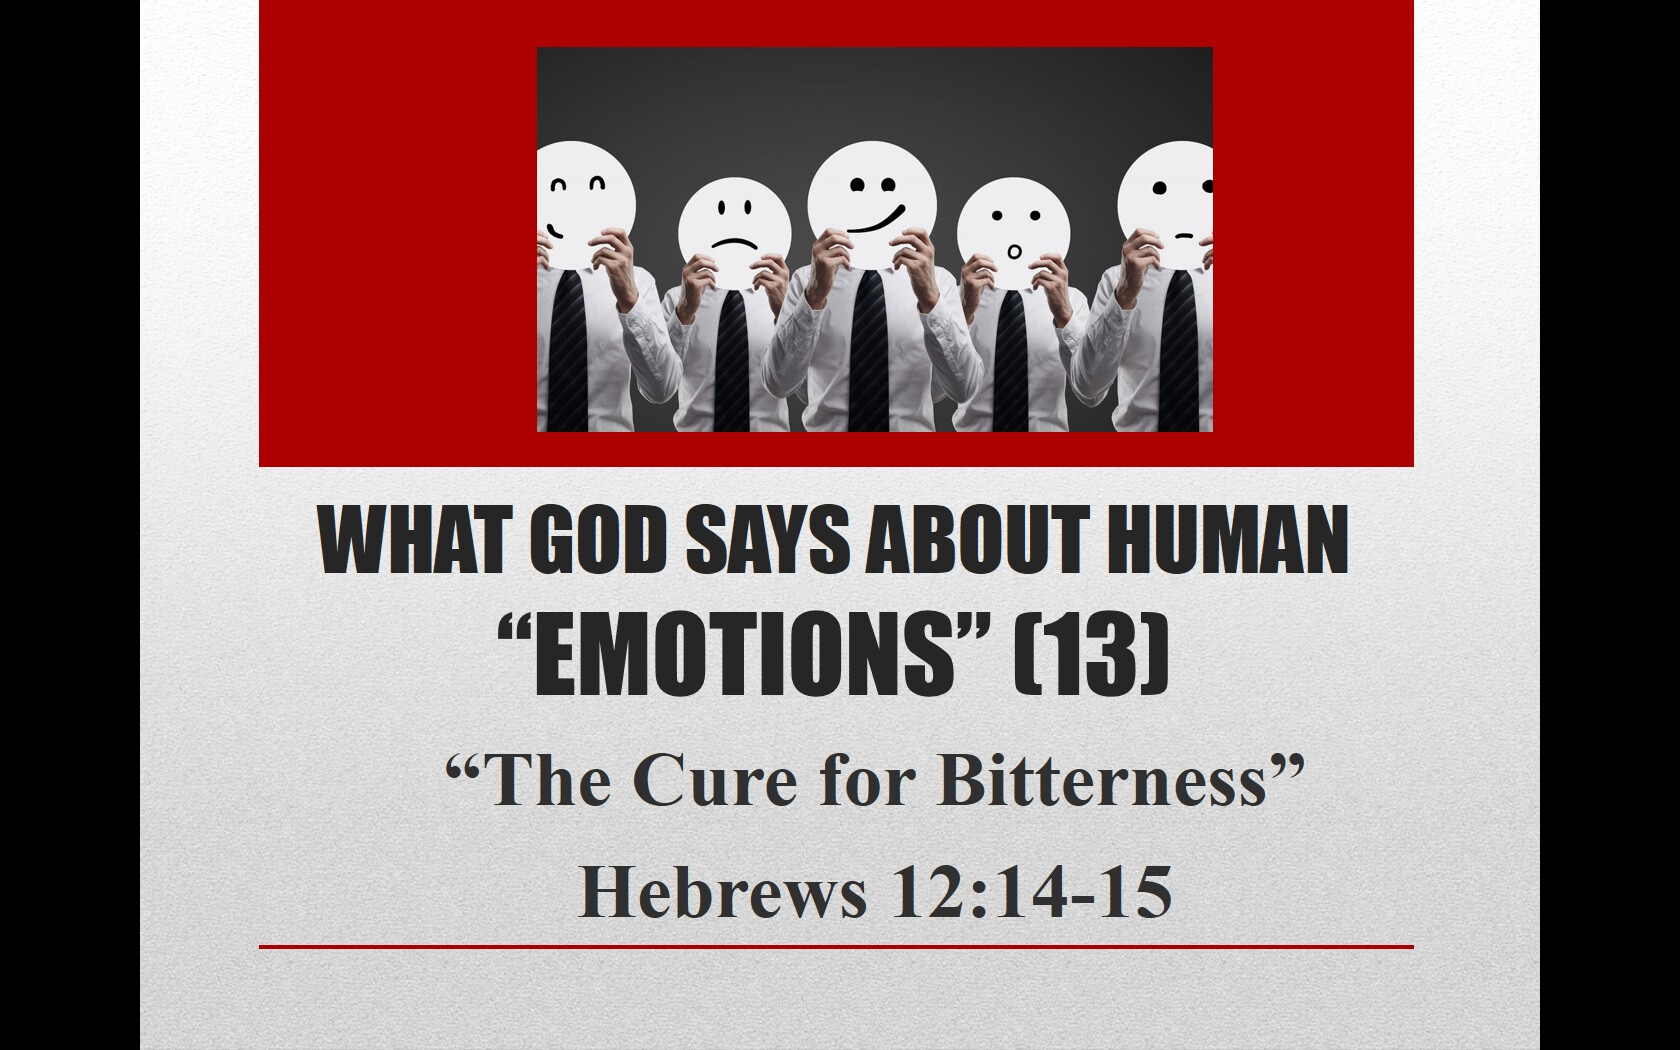 The Cure of Bitterness